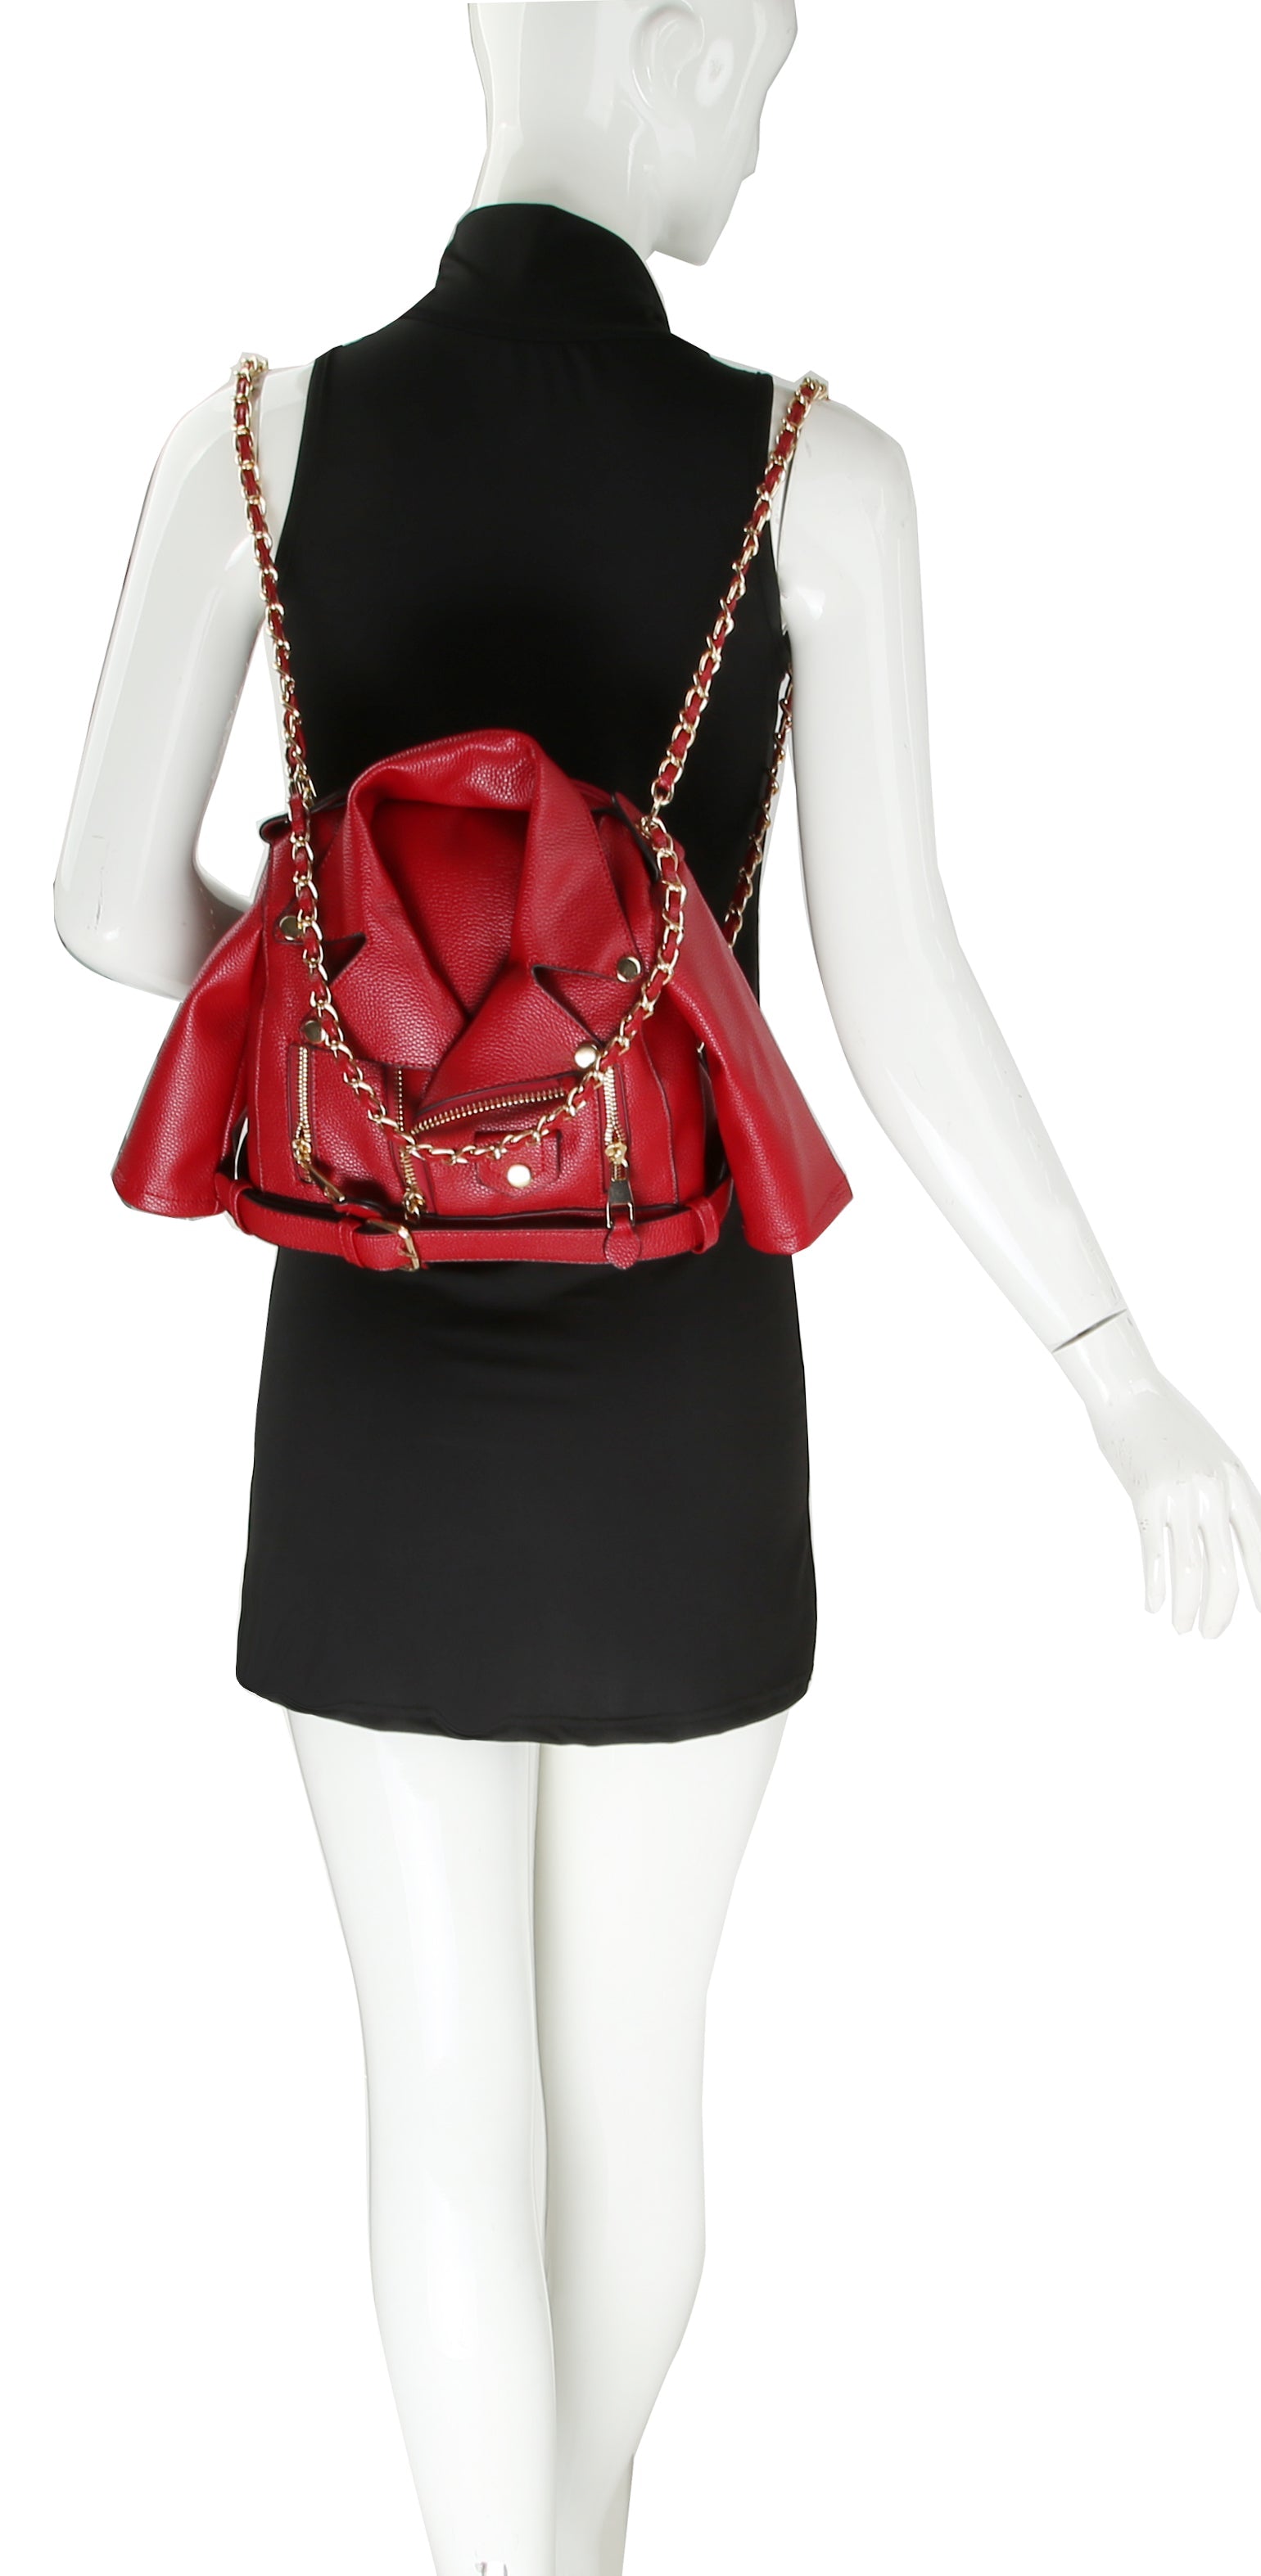 LEATHER JACKET CONVERTIBLE BACK PACK